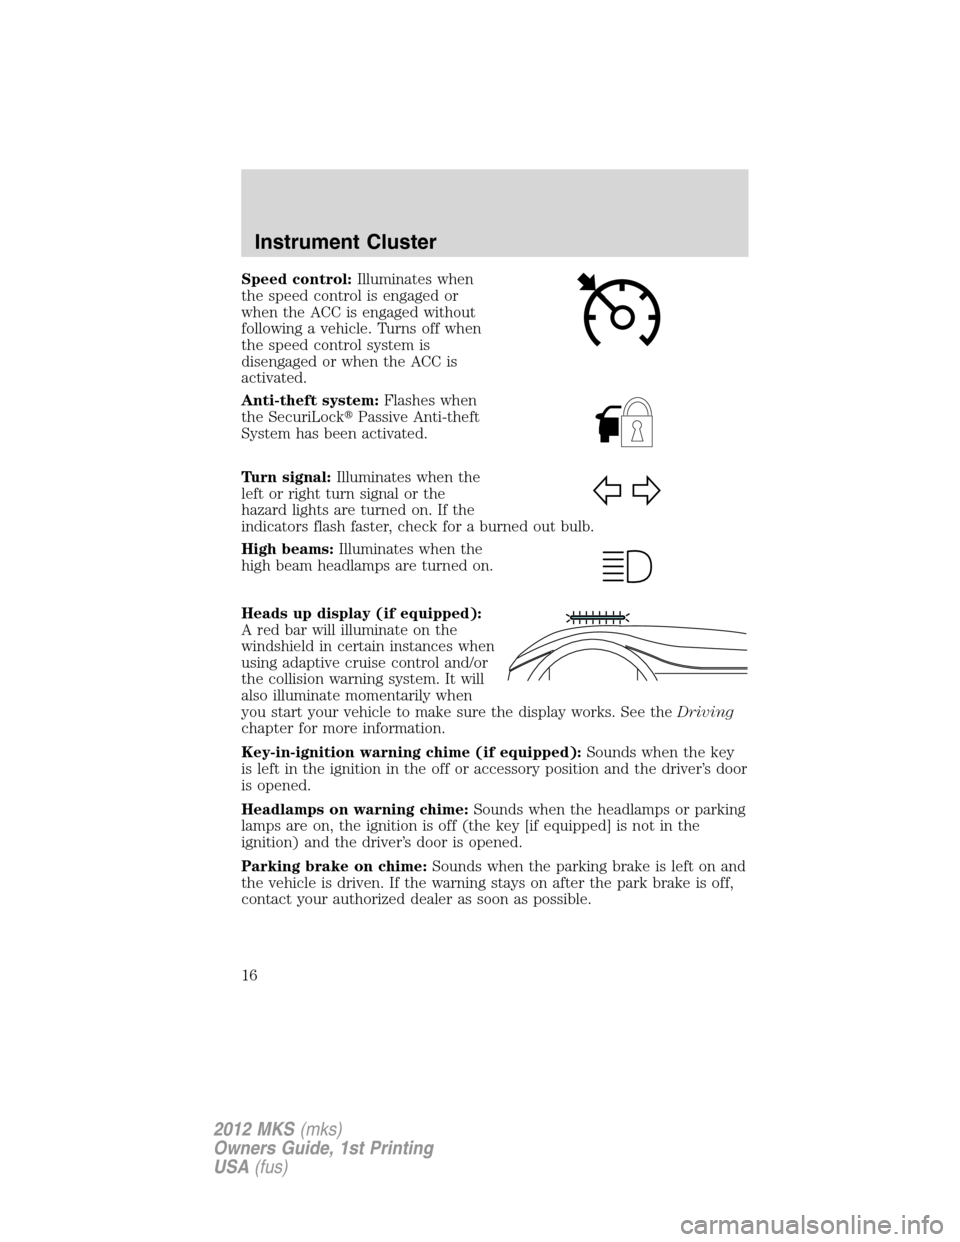 LINCOLN MKS 2012  Owners Manual Speed control:Illuminates when
the speed control is engaged or
when the ACC is engaged without
following a vehicle. Turns off when
the speed control system is
disengaged or when the ACC is
activated.
